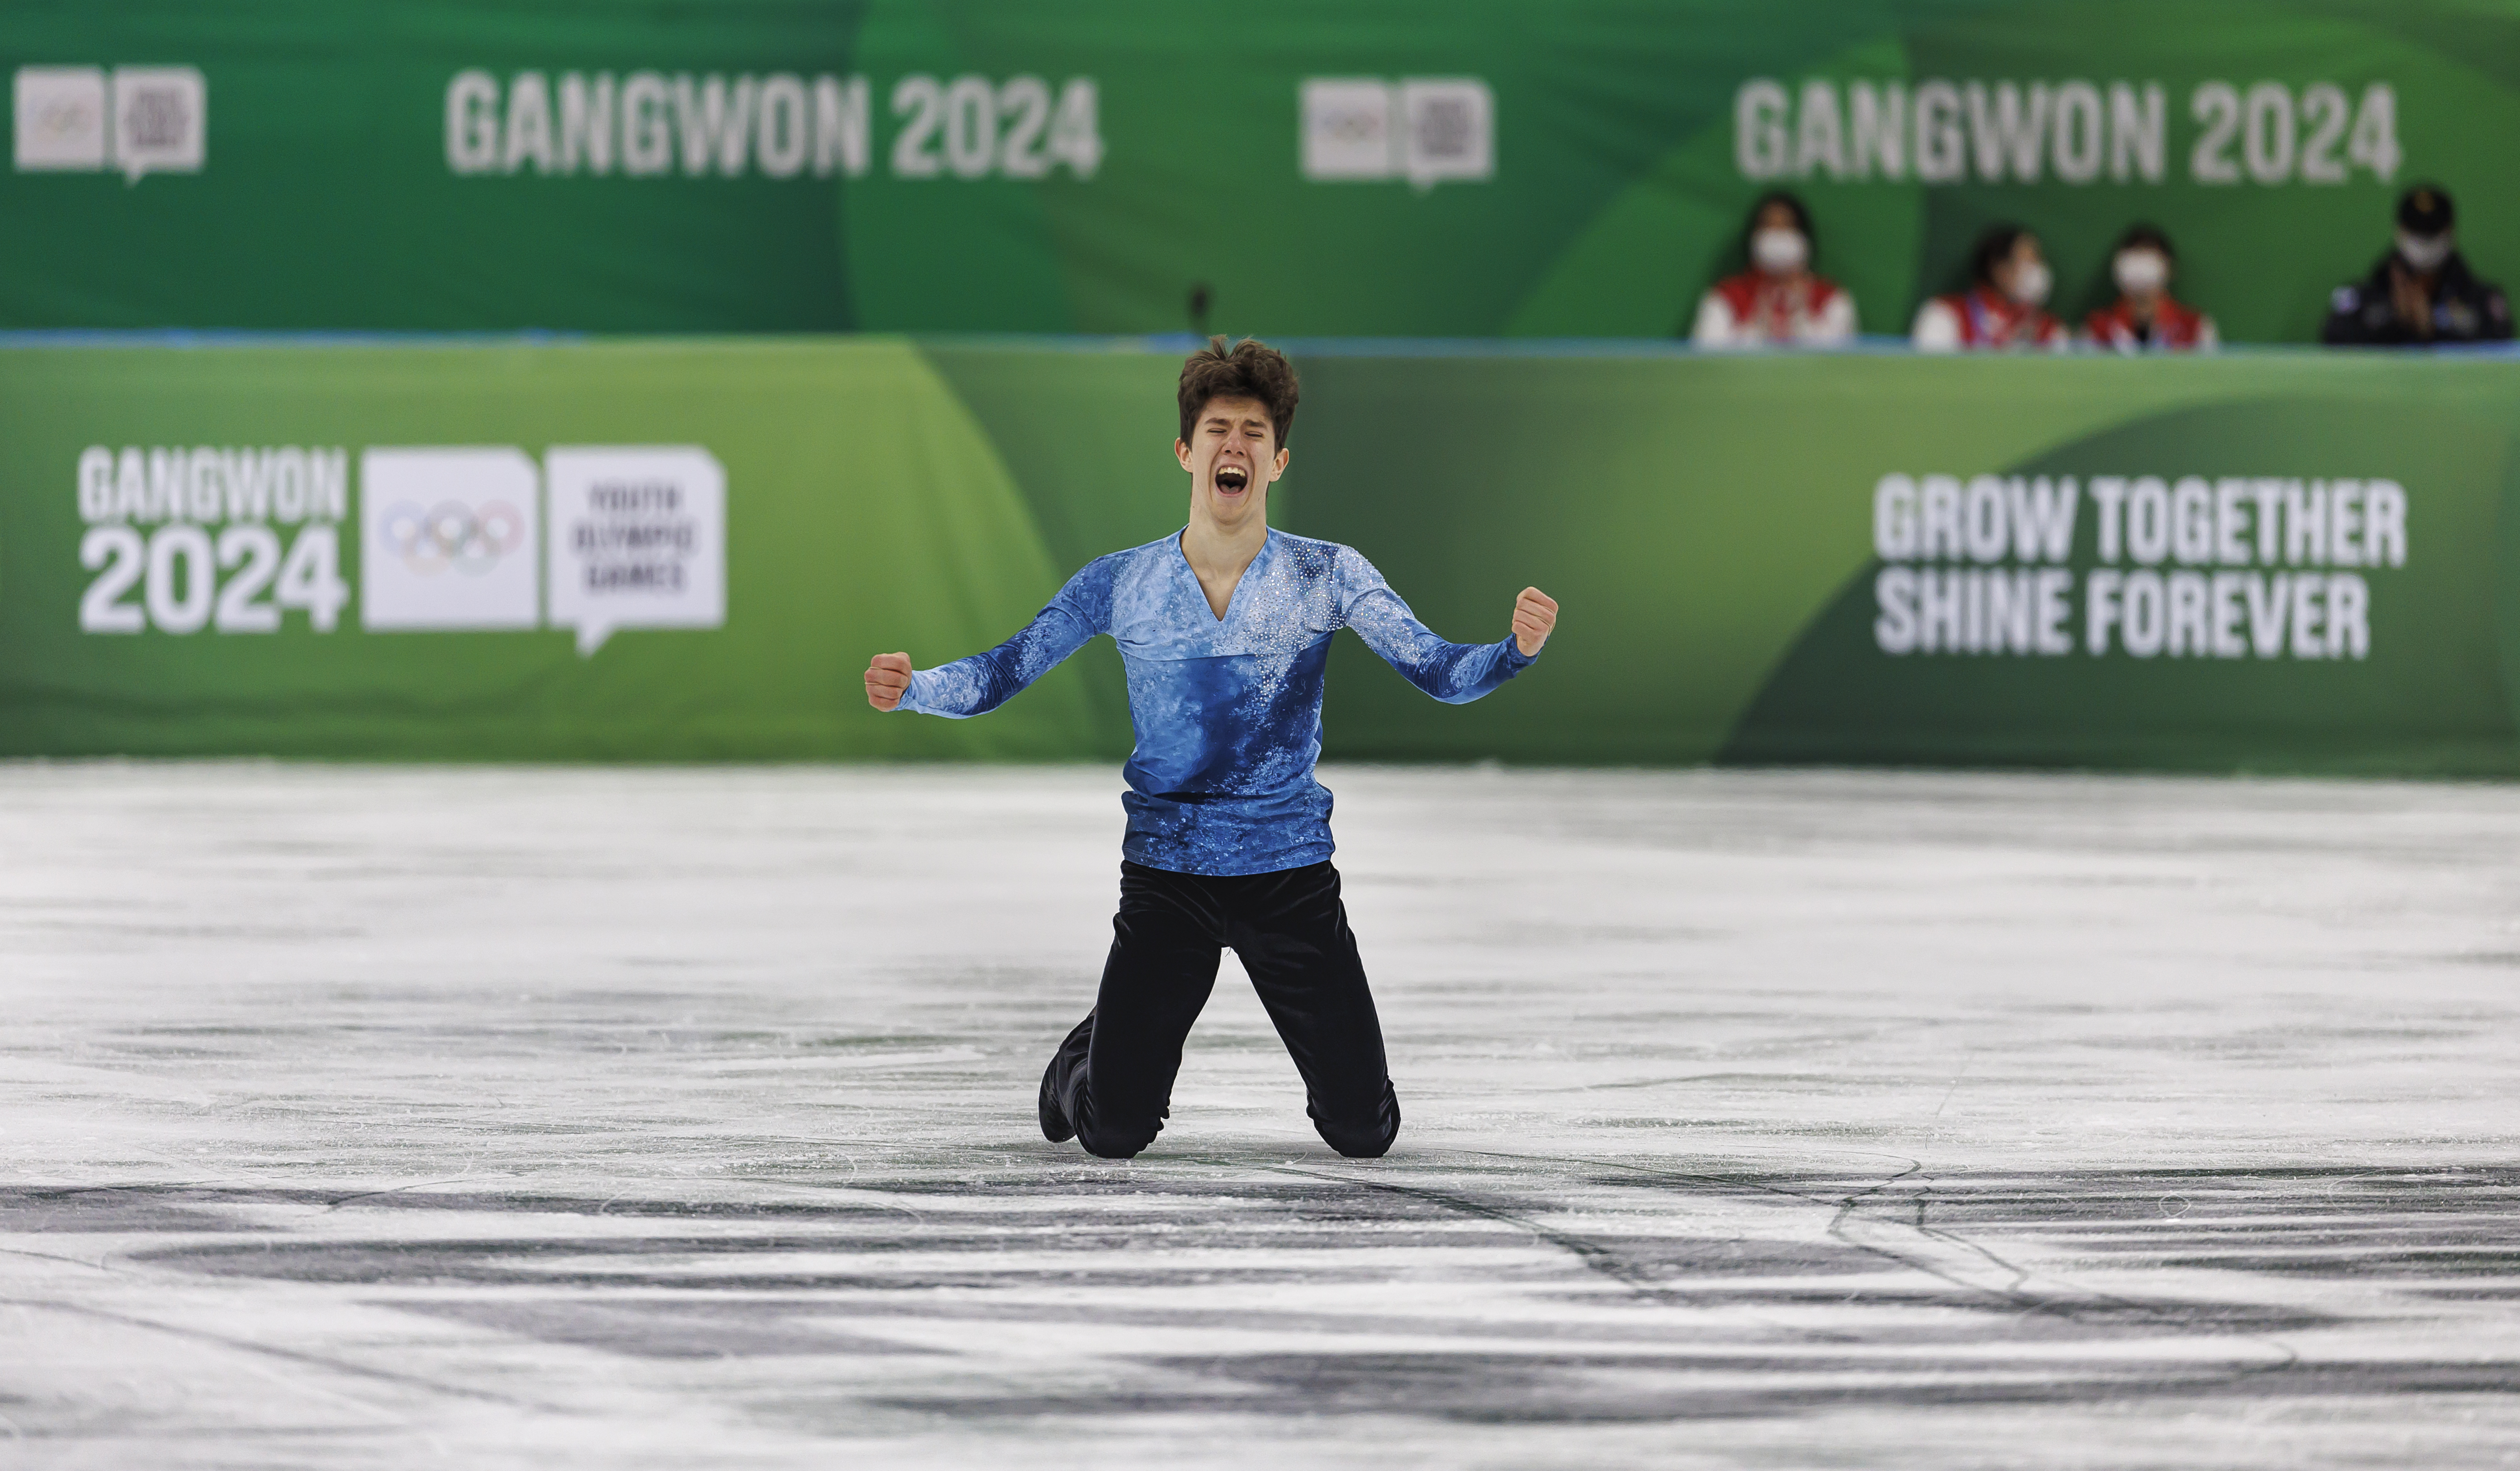 Adam Hagara (SVK) celebrates at the end of his routine during the Men's Singles at Gangwon 2024